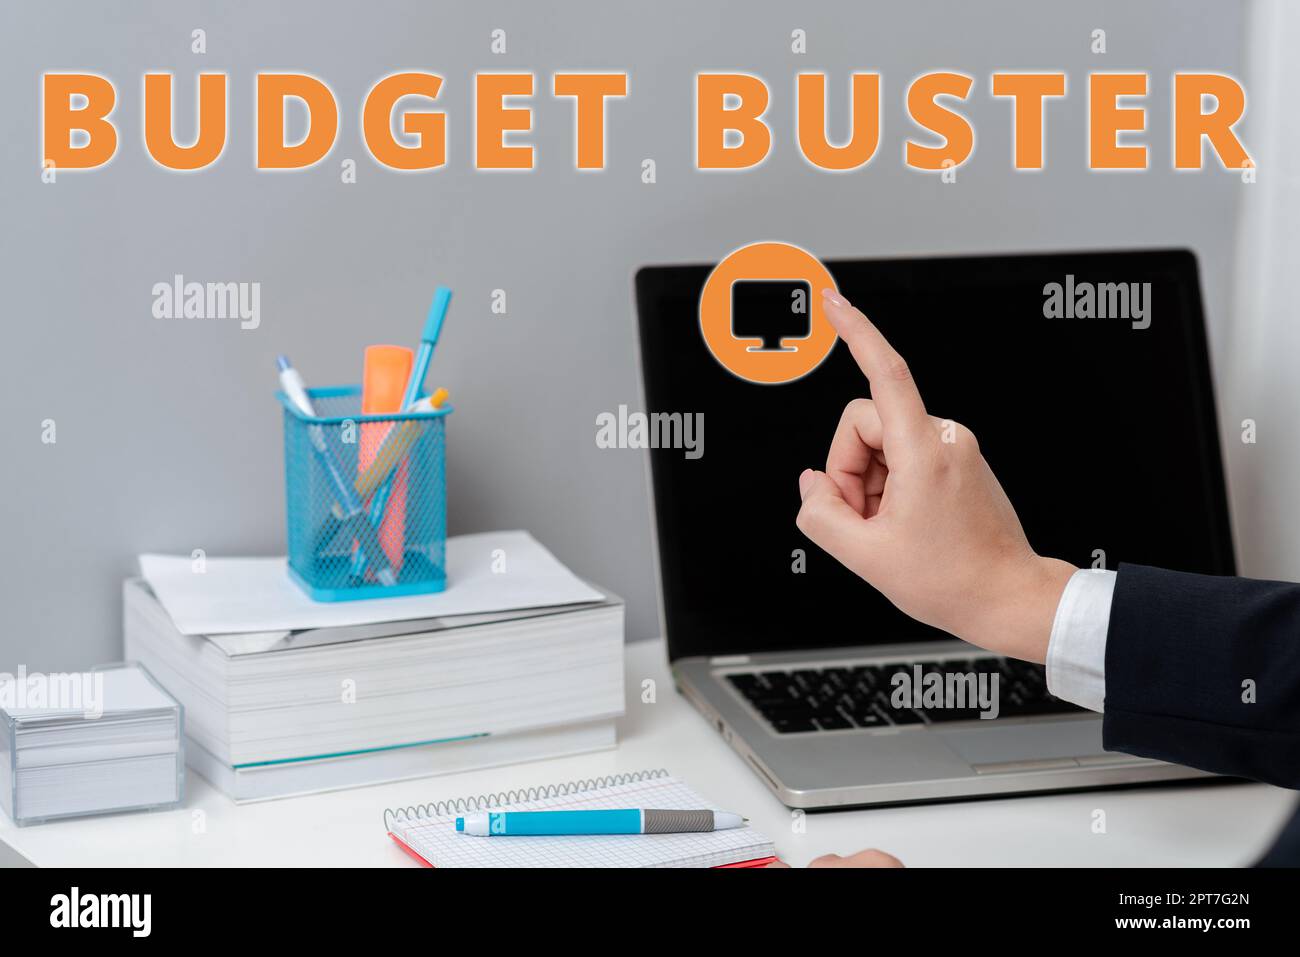 Sign displaying Budget Buster, Business idea Carefree Spending Bargains Unnecessary Purchases Overspending Stock Photo